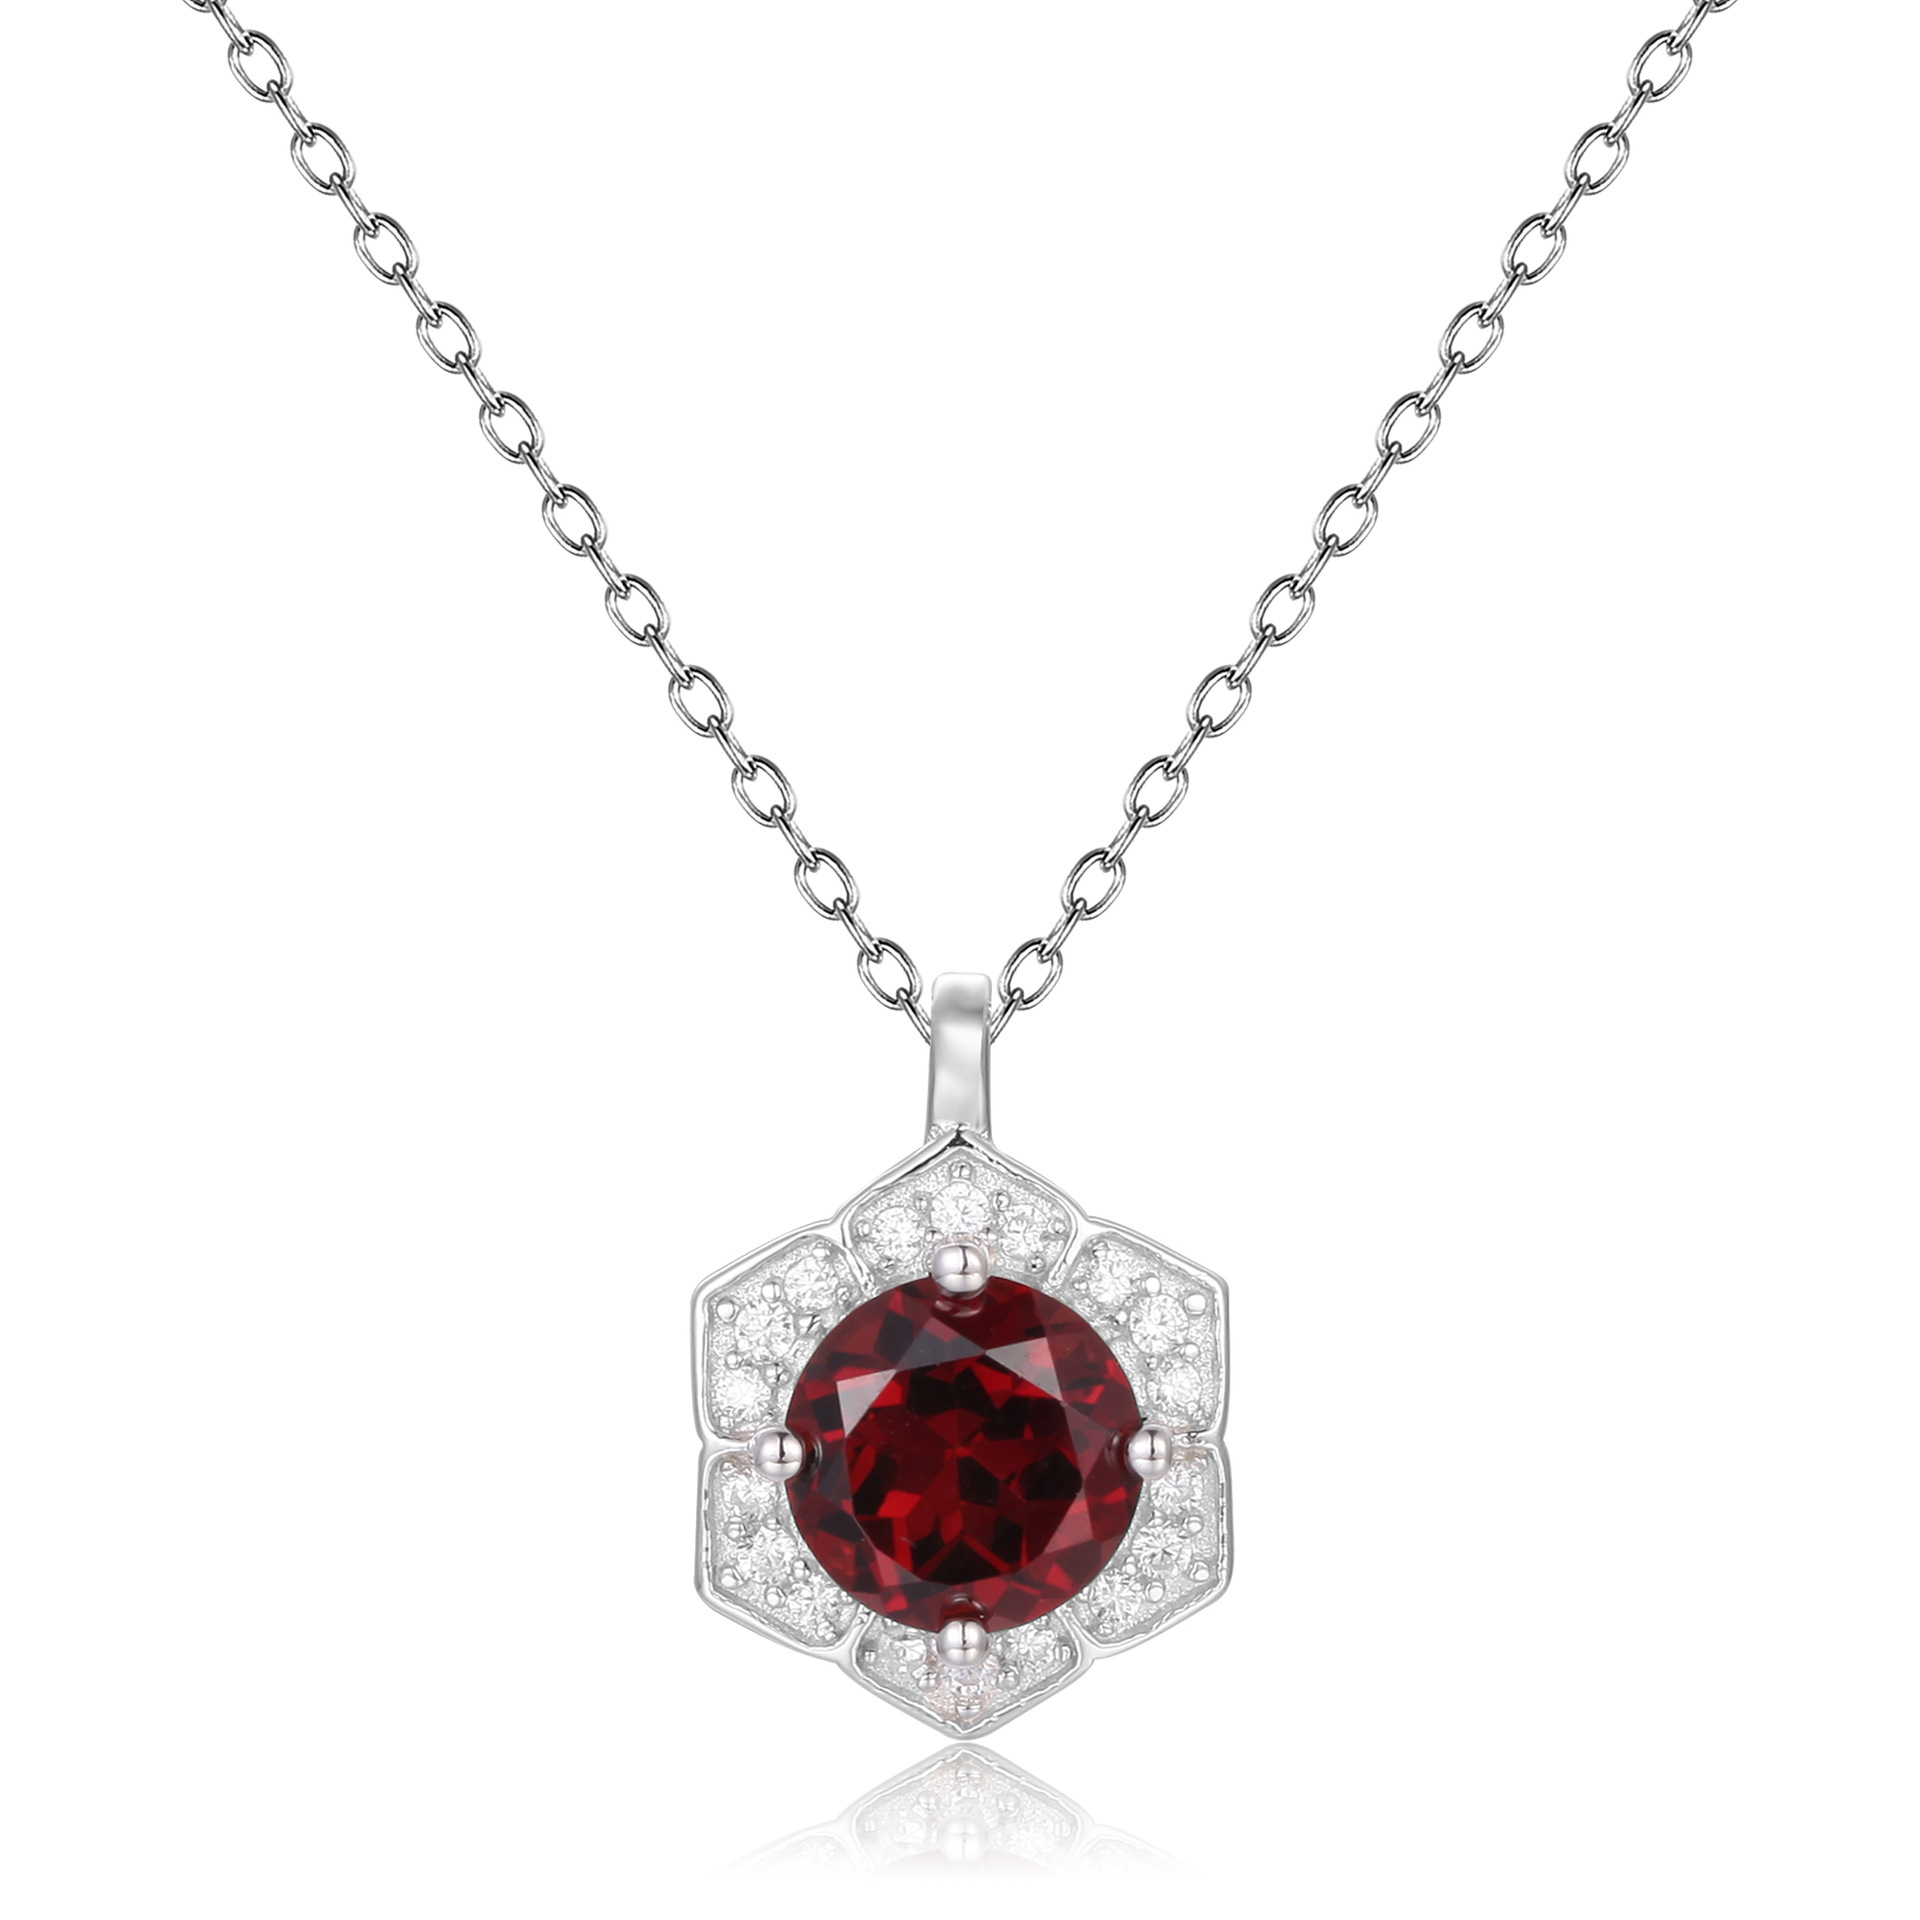 Luxury 6-sided surround set S925 sterling silver necklace-BlingRunway